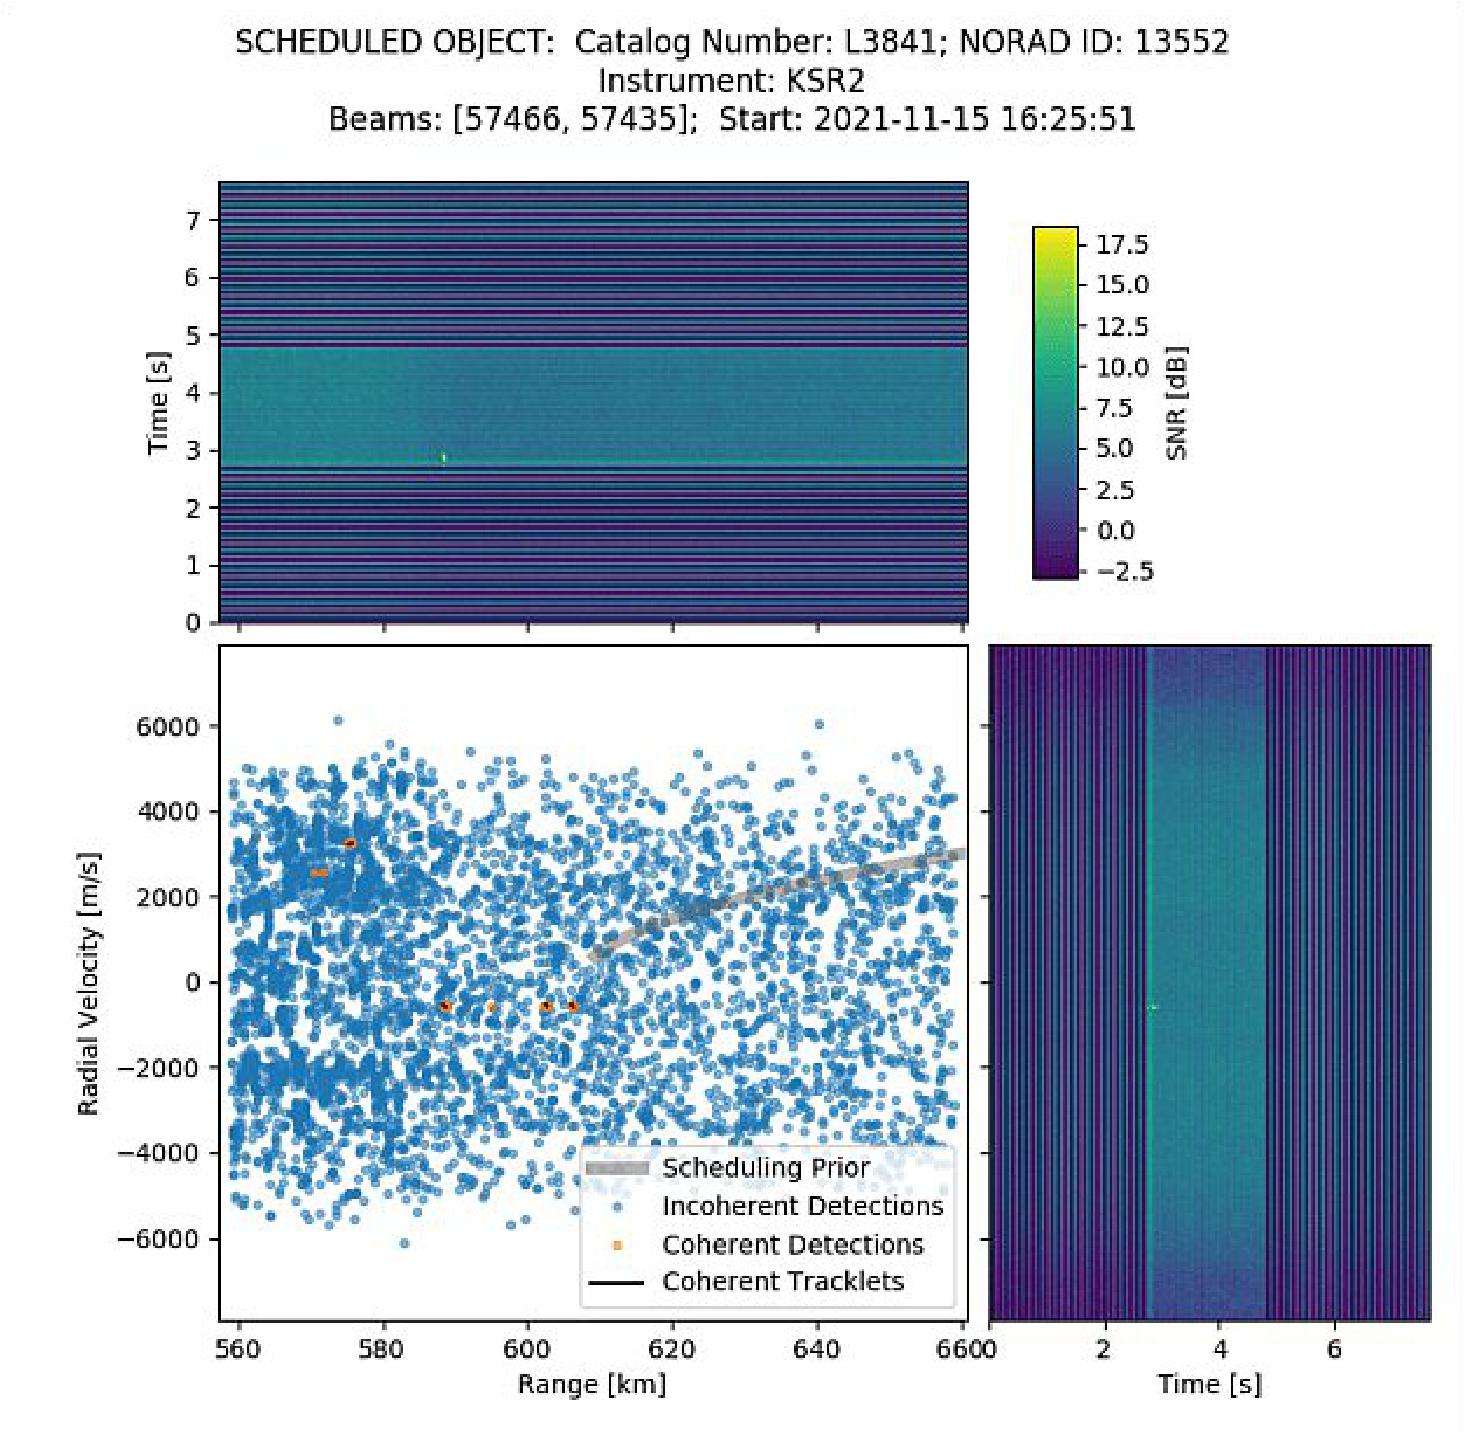 Figure 10: Plot showing early detection of Cosmos 1408 debris objects passing over Kiwi Space Radar (image credit: LeoLabs Australia)